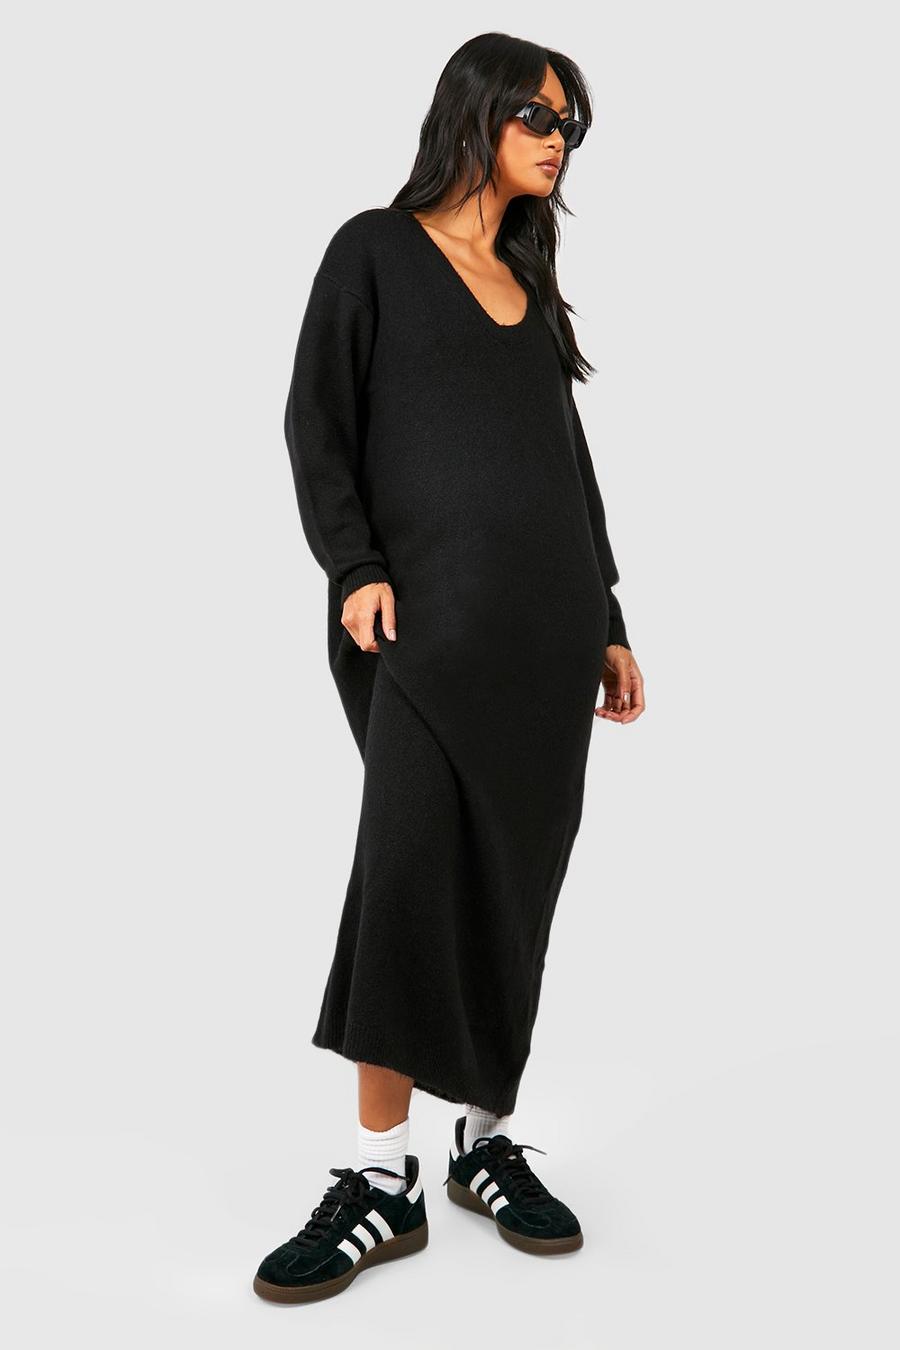 Black Slouchy Soft Knit Maxi Knitted Dress